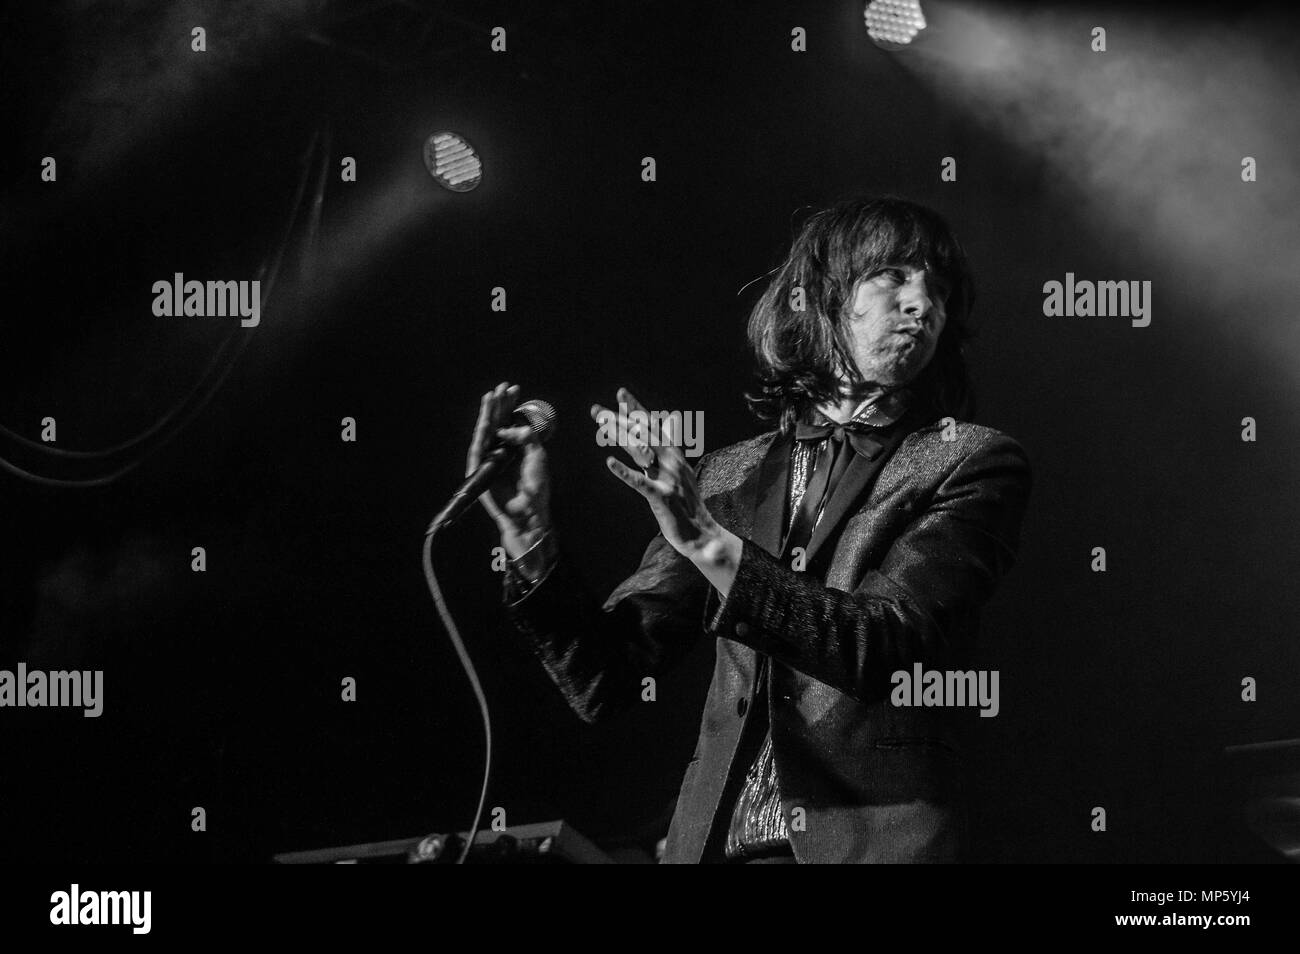 Bobby Gillespie with Primal Scream at Manchester Academy - 15 December 2013 Stock Photo